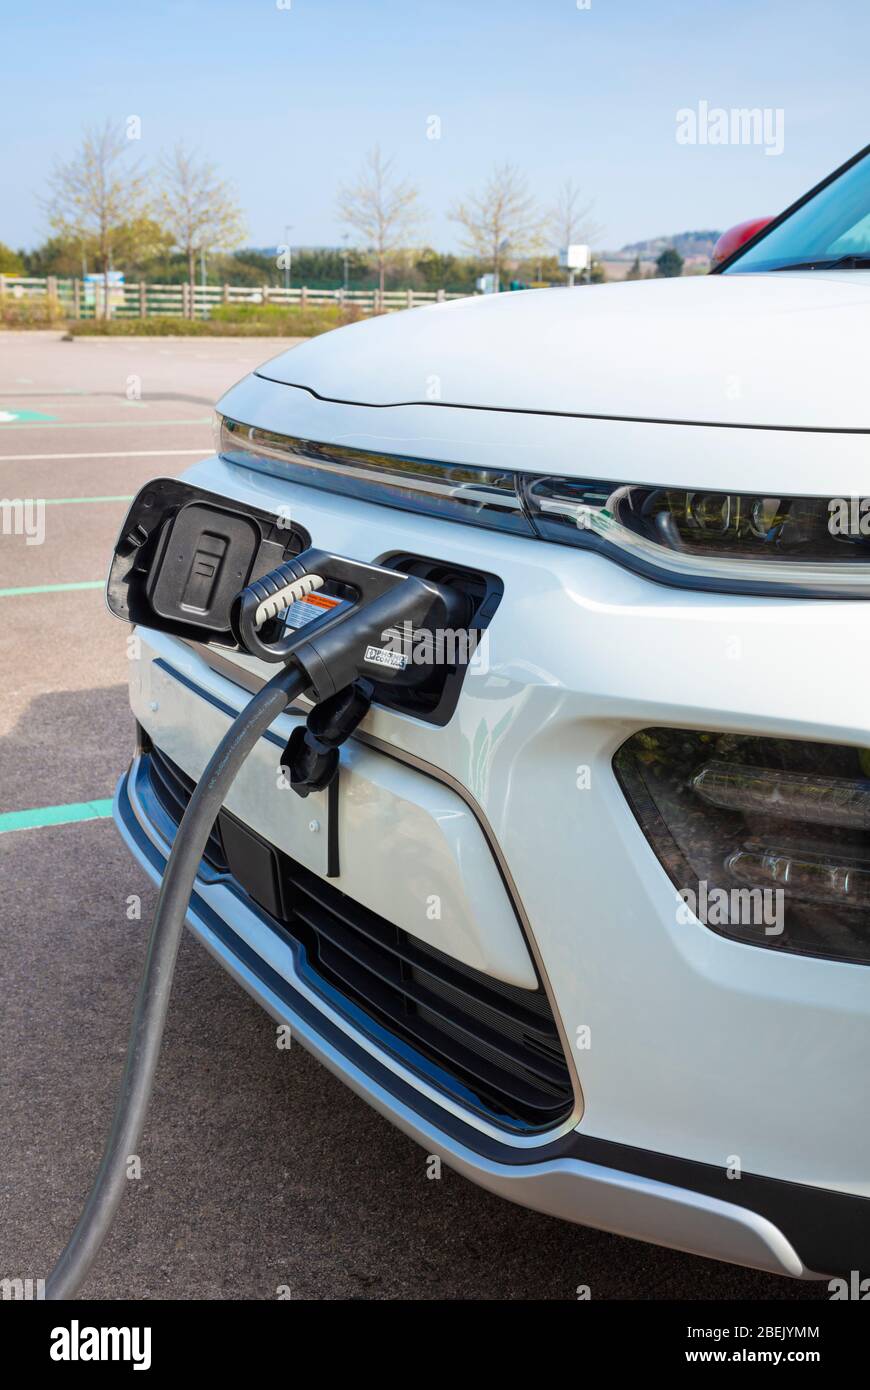 New electric car Kia E Soul registered march 2020 electric car charging at a public electric car charger plugged into a rapid car charging unit Stock Photo